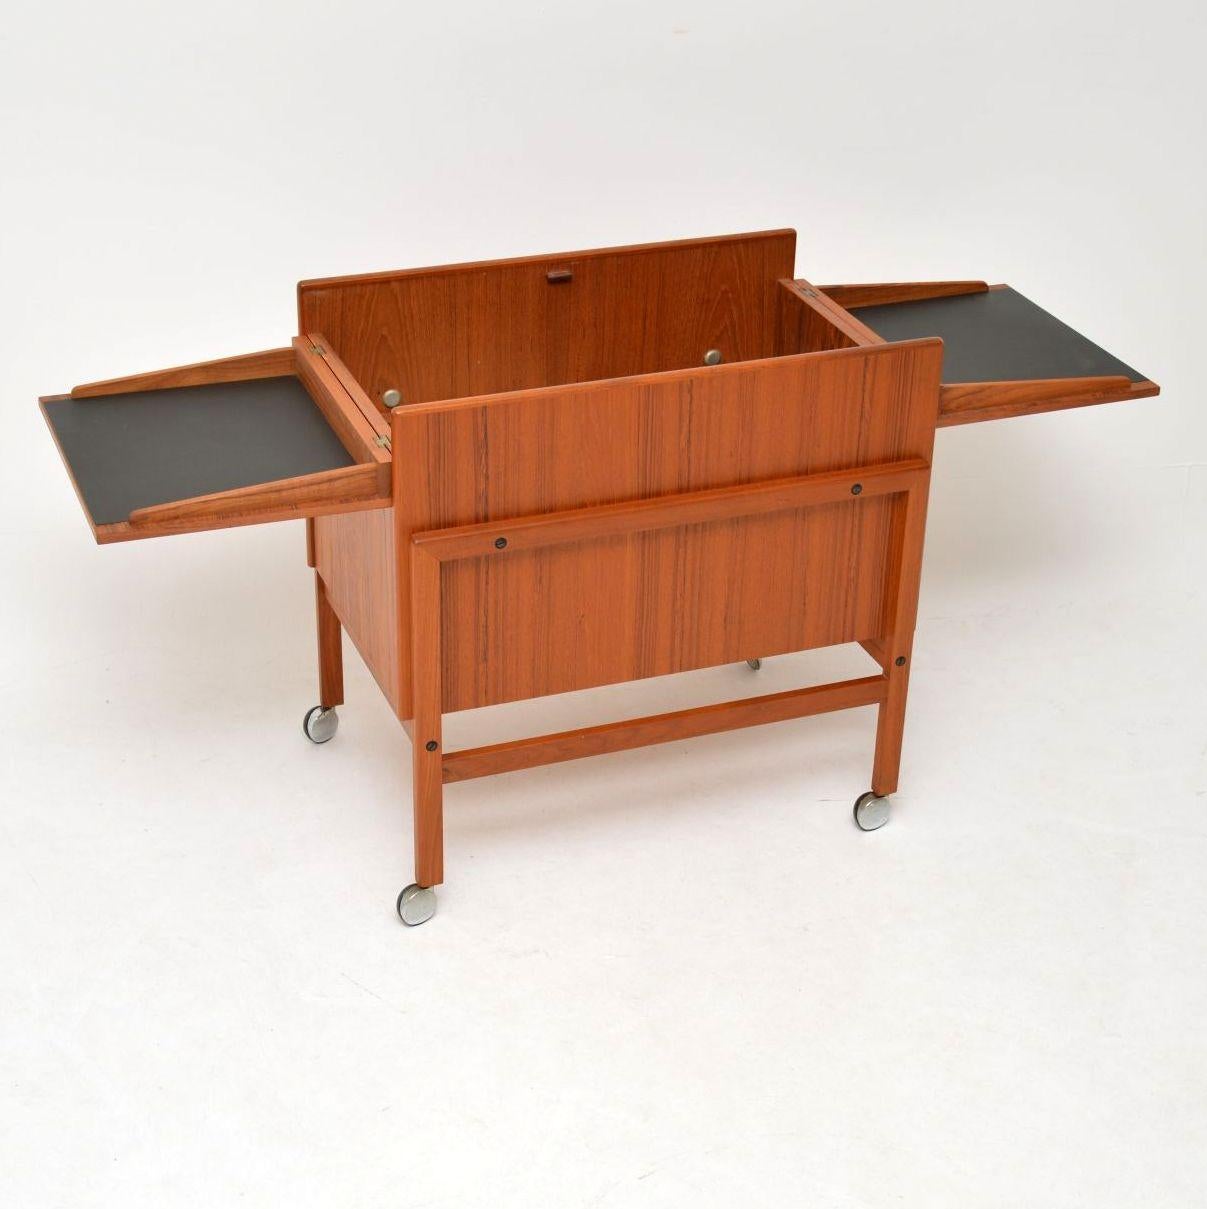 A beautifully designed Danish dry bar in teak, this was designed by Andreas Hansen and was made by Arrebo Mobler in the 1960s. This is in excellent condition throughout, its clean, sturdy and sound, with barely any wear to be seen. The top opens out